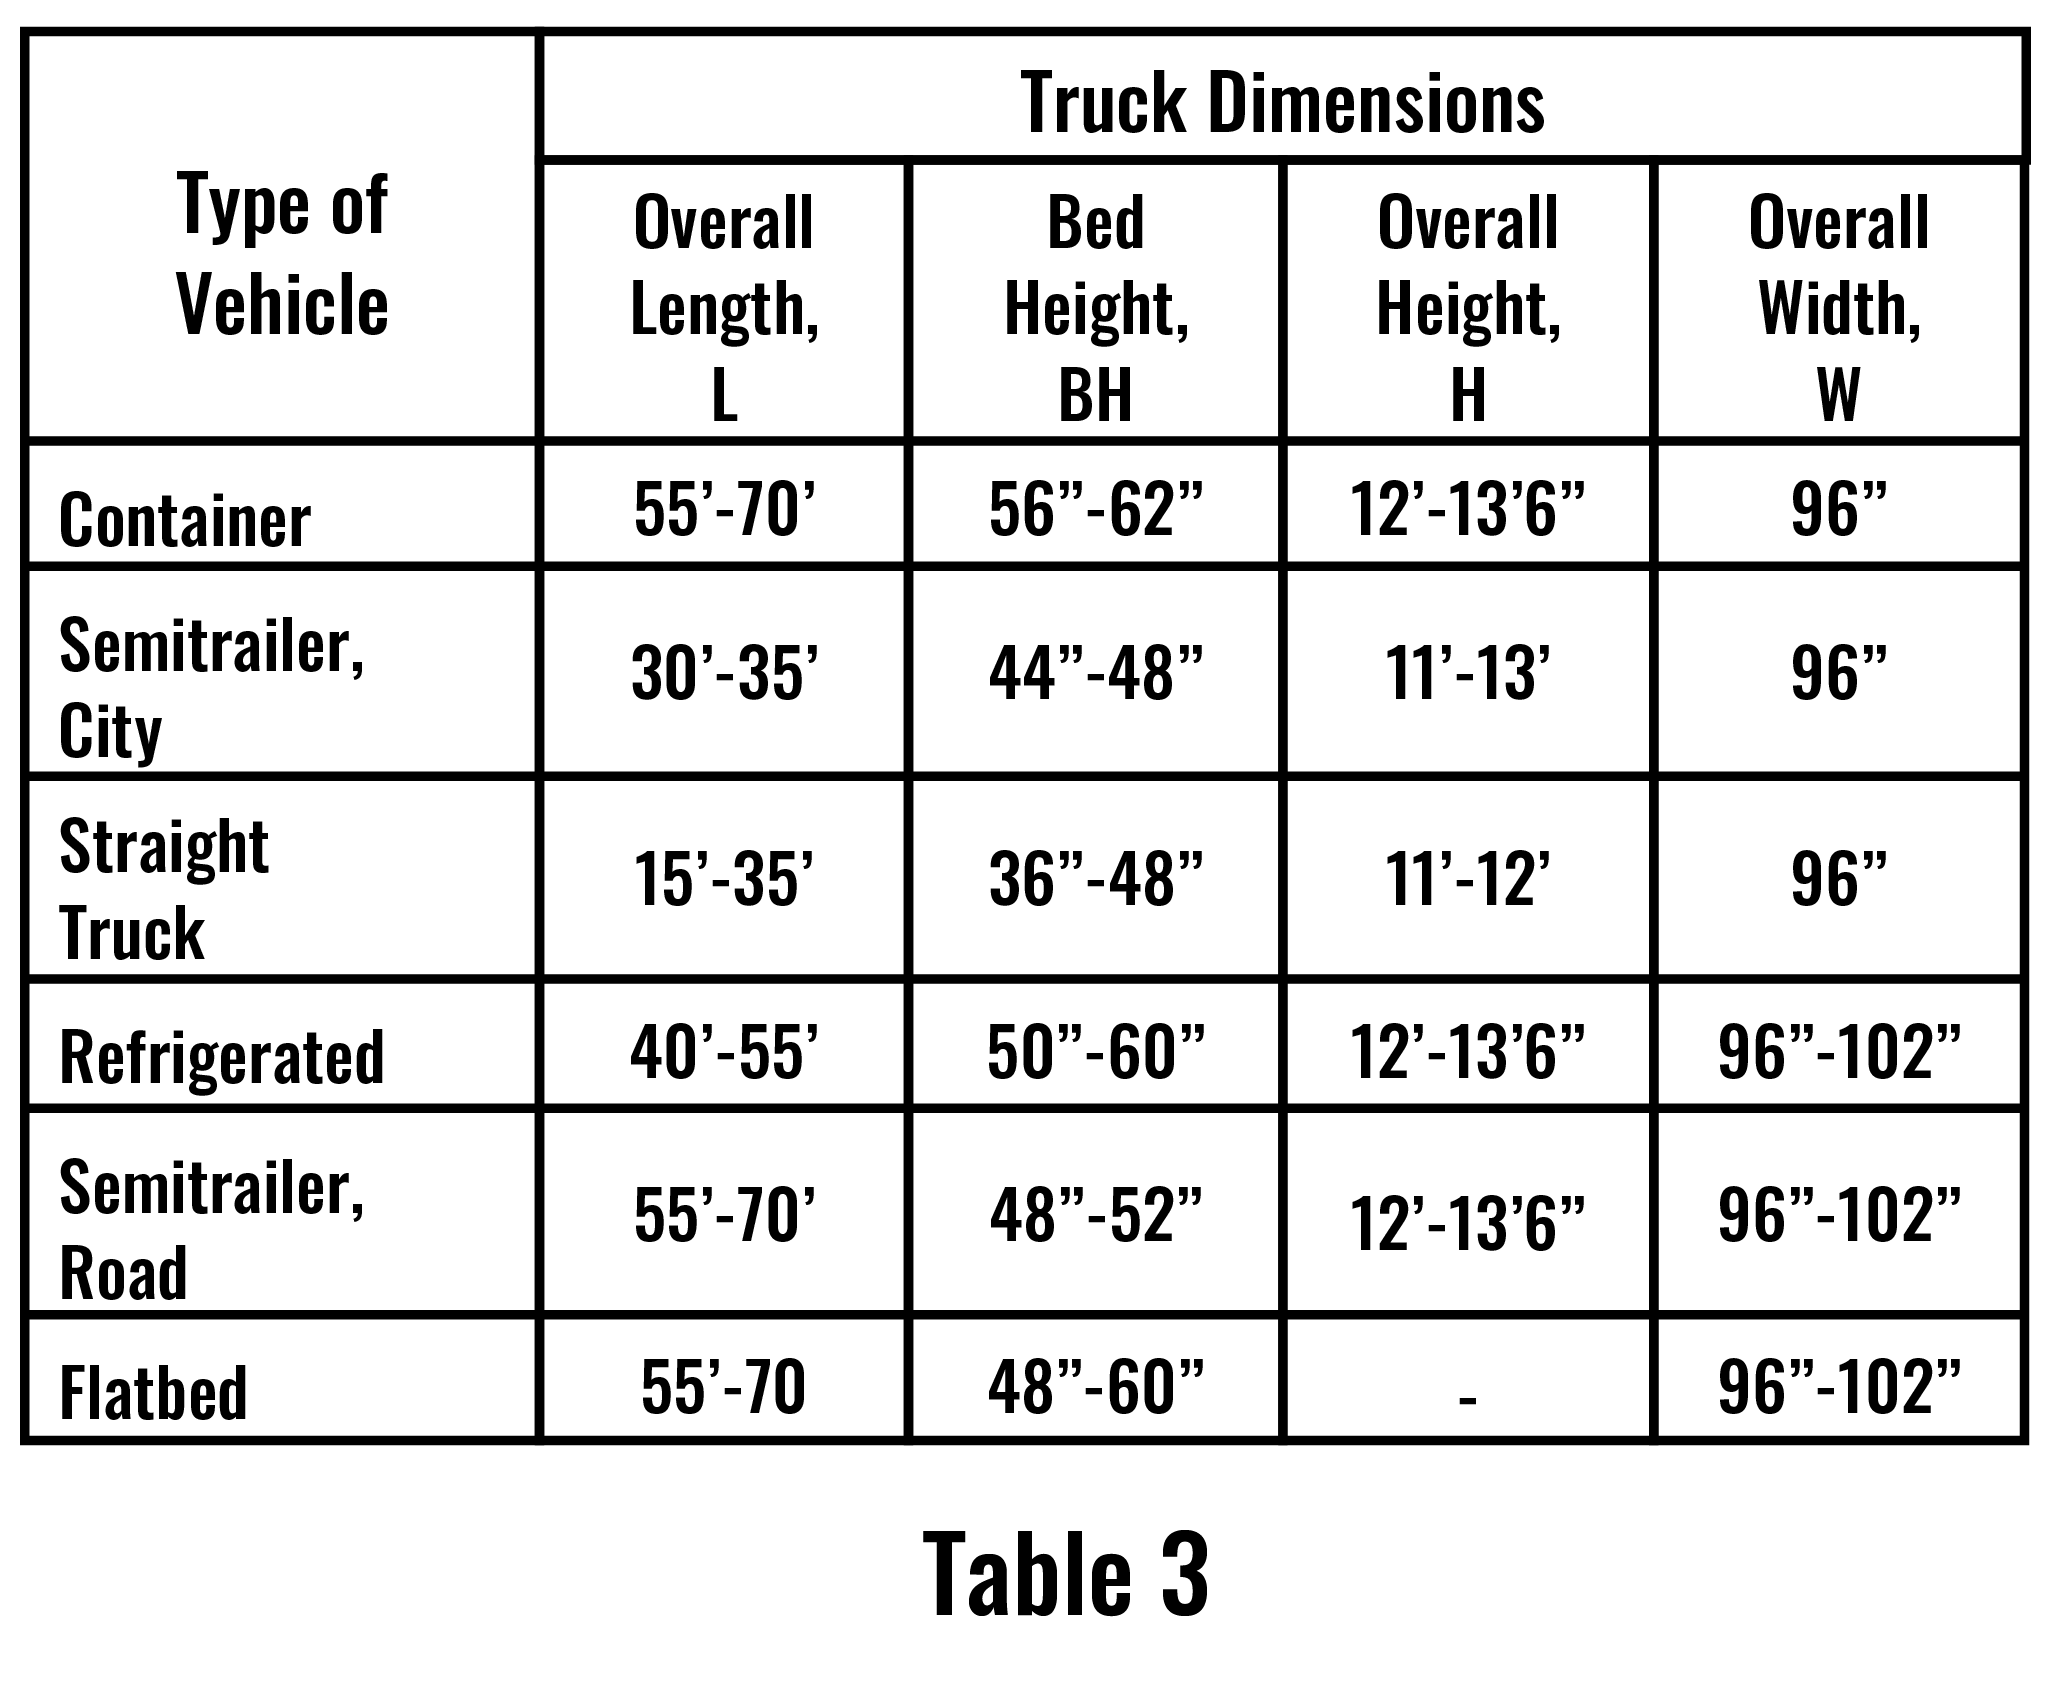 Text Table Comparing Type of Vehicle and Truck Dimensions